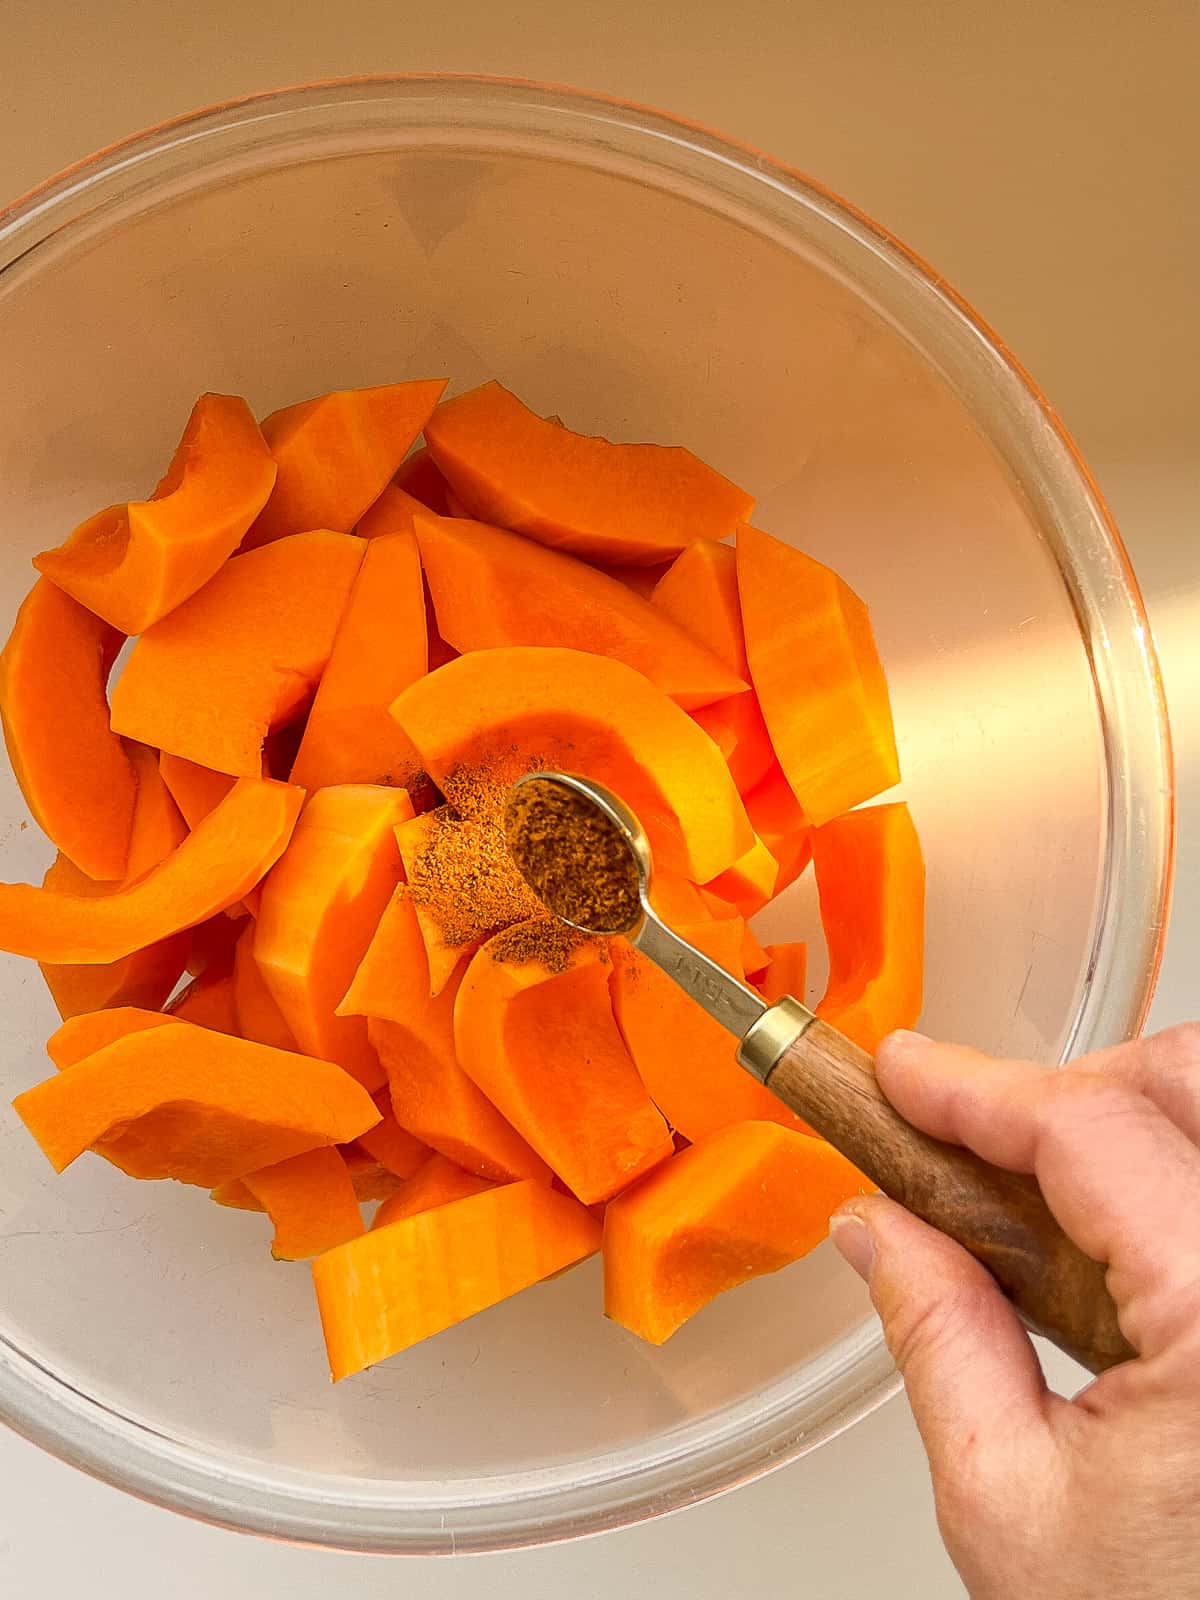 An image of spices being added to a bowl of butternut squash wedges.